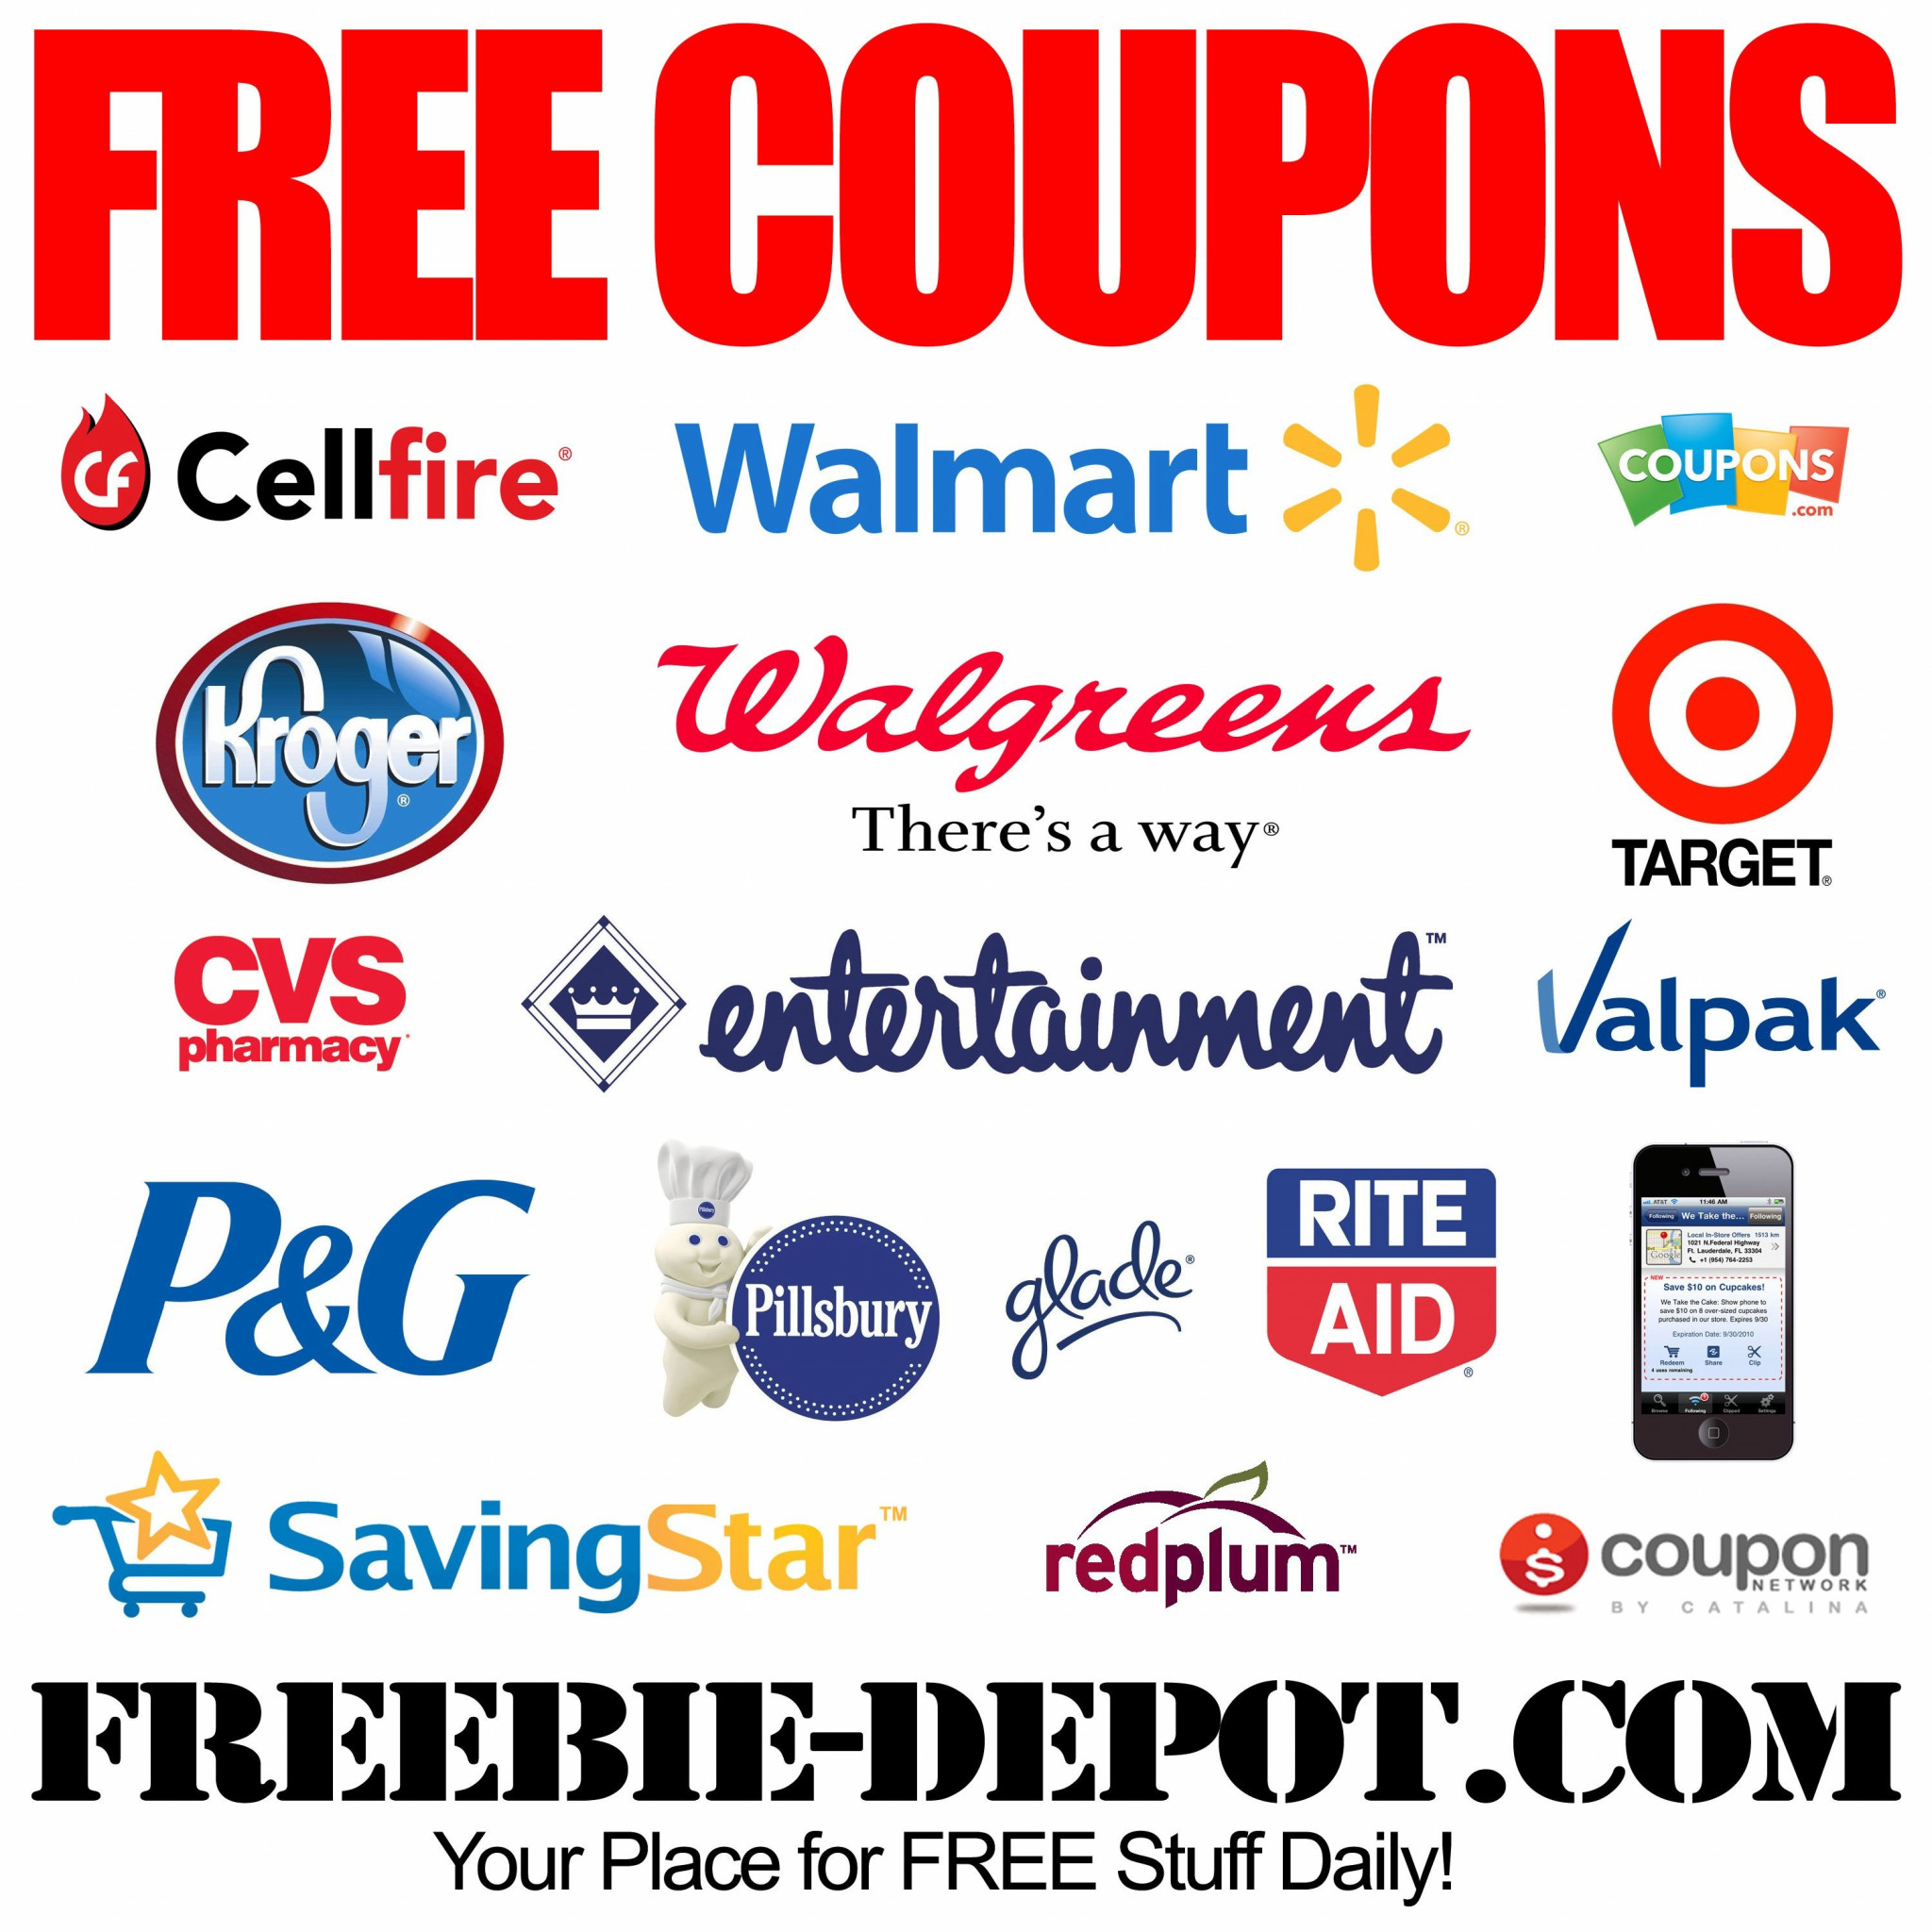 grocery-coupons-printable-free-no-registration-printable-templates